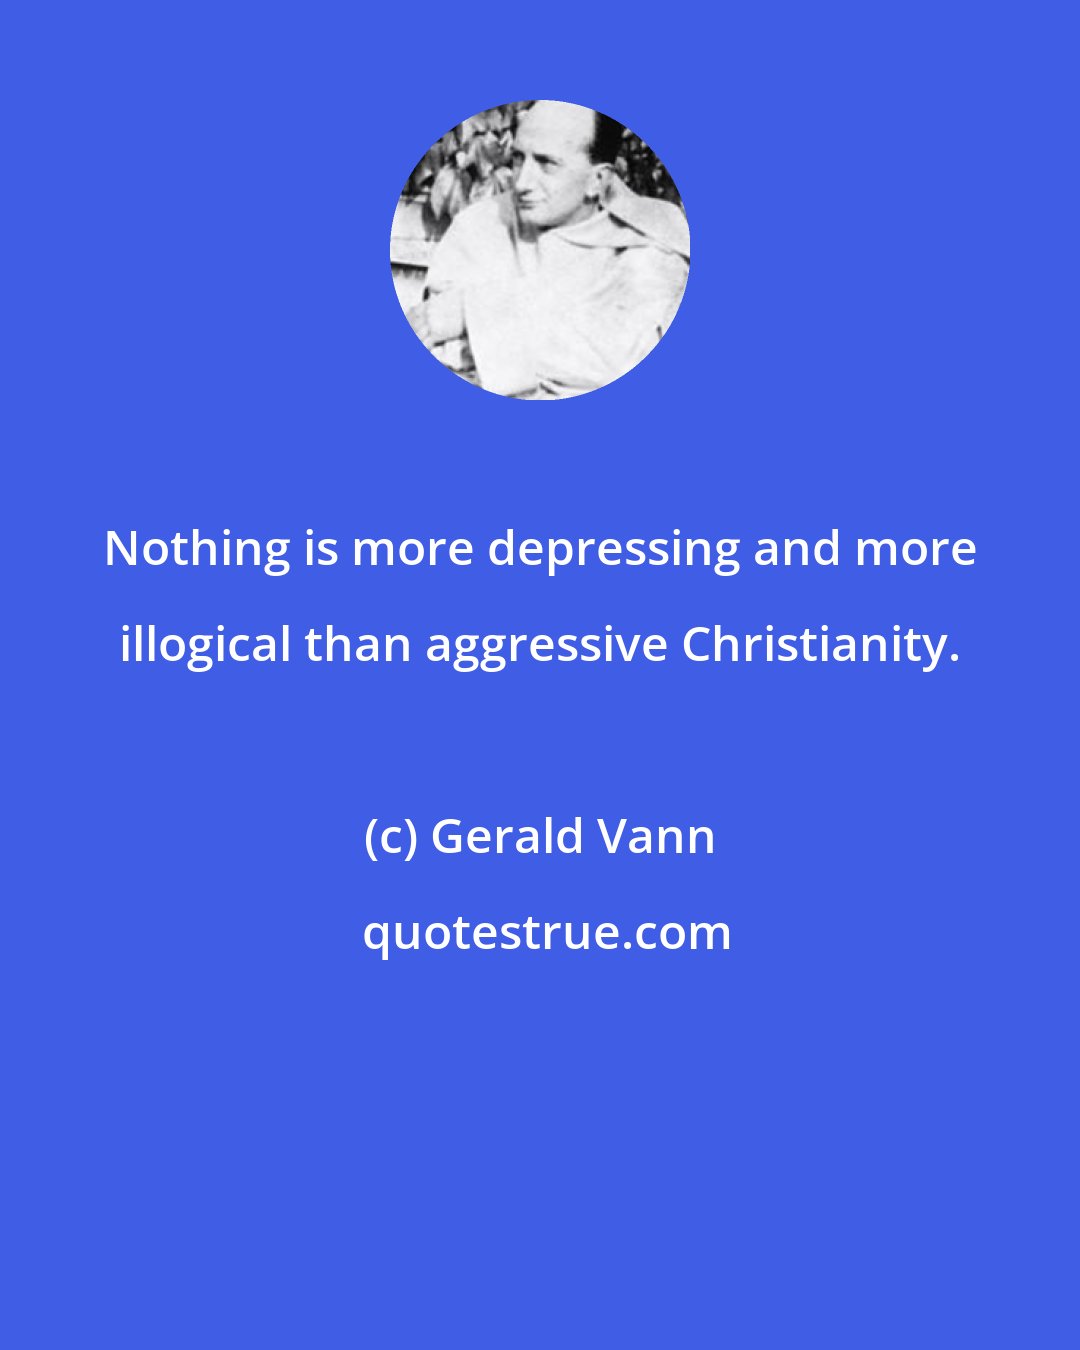 Gerald Vann: Nothing is more depressing and more illogical than aggressive Christianity.